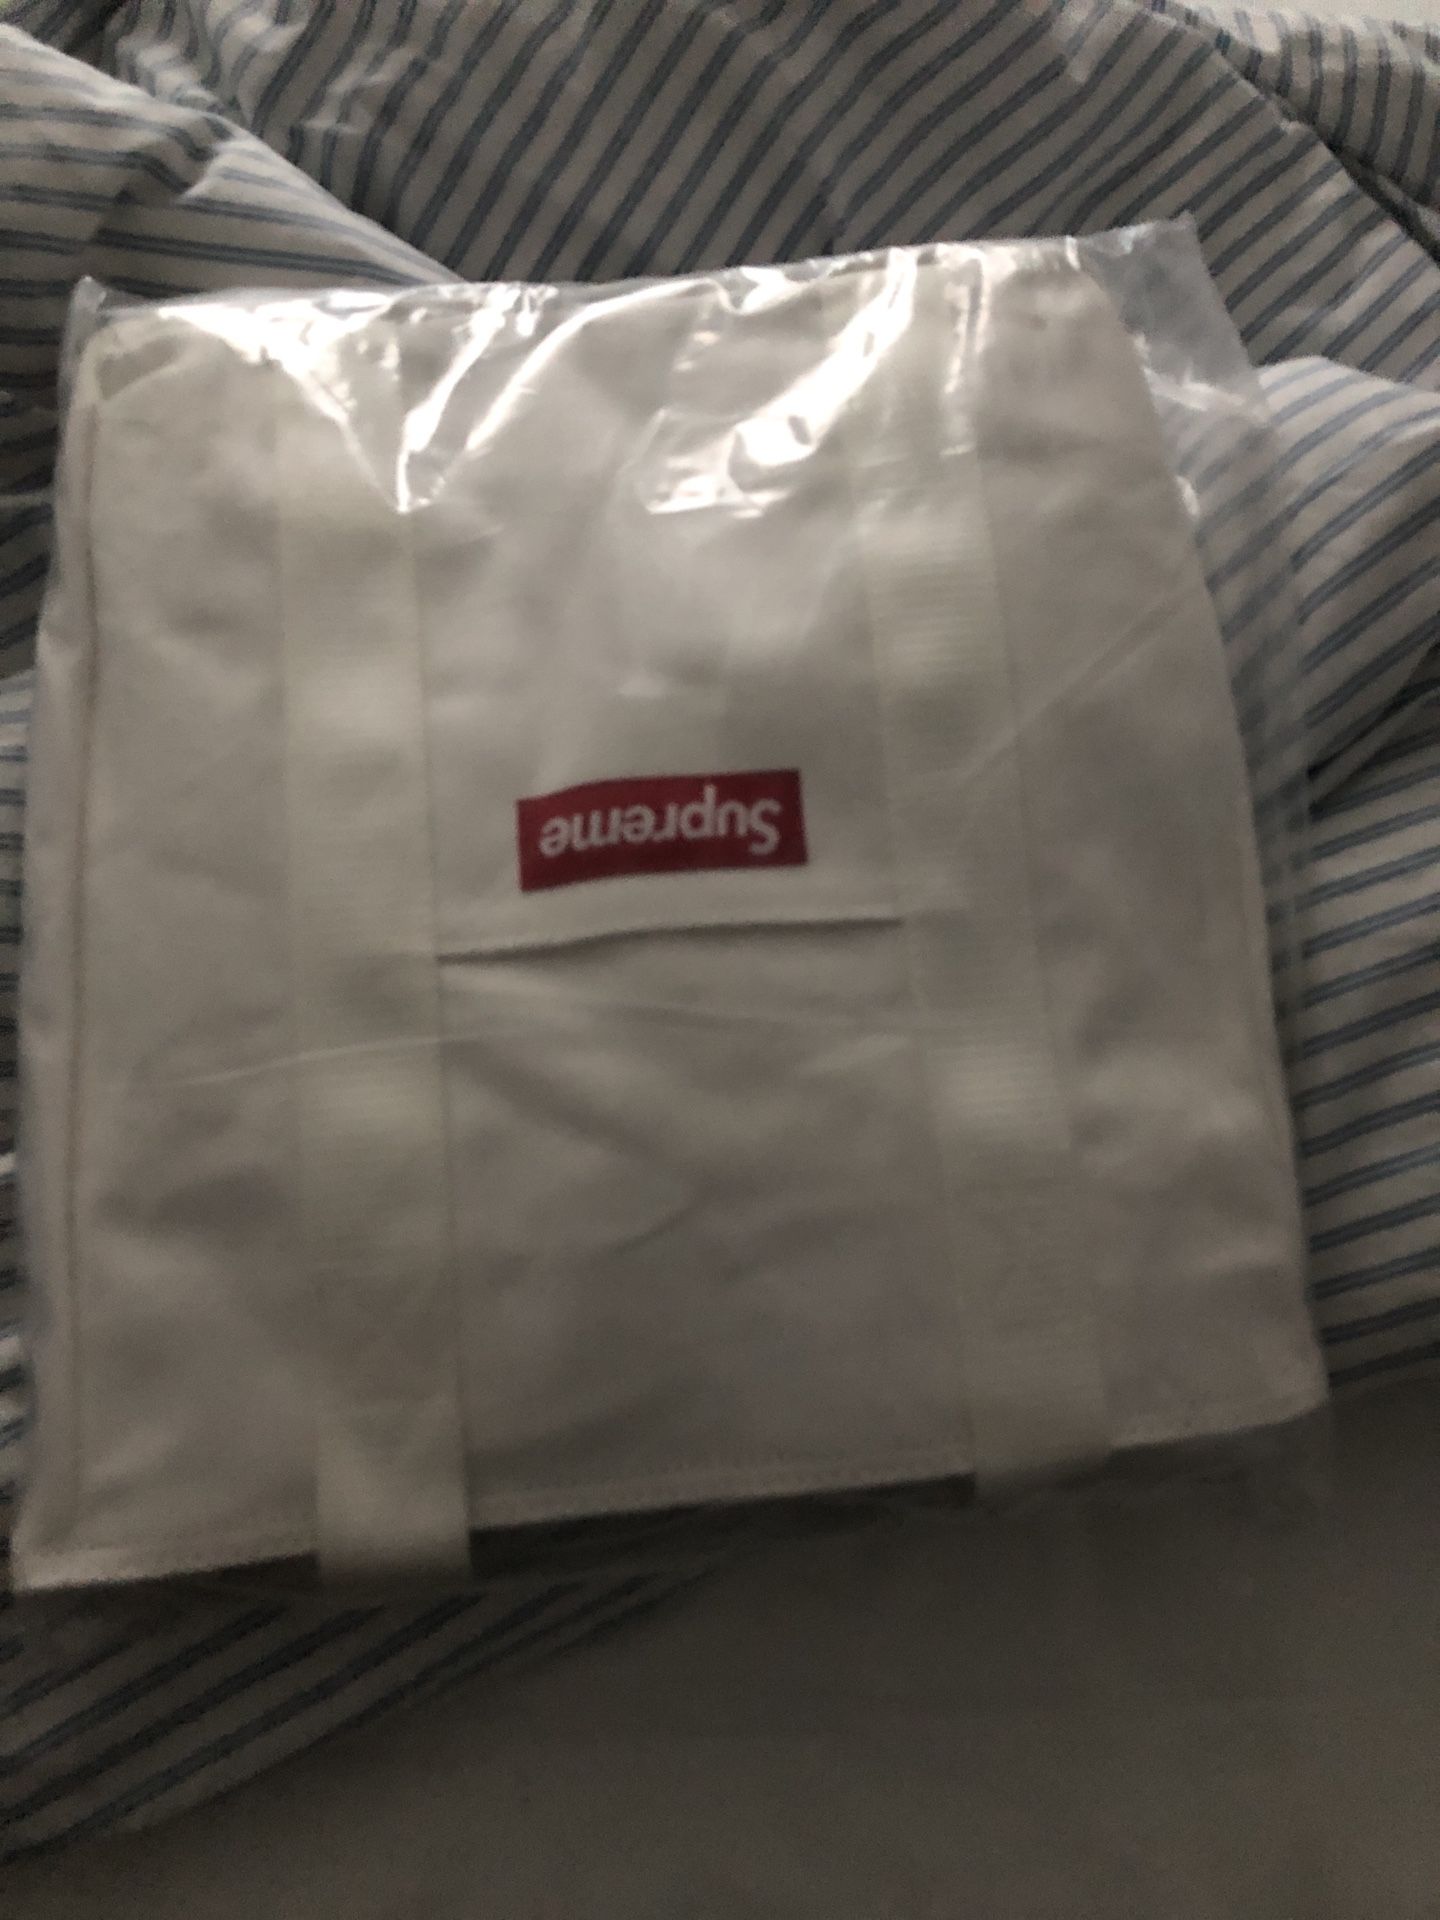 Supreme tote bag - never taken out of package. Trying to clean out inventory